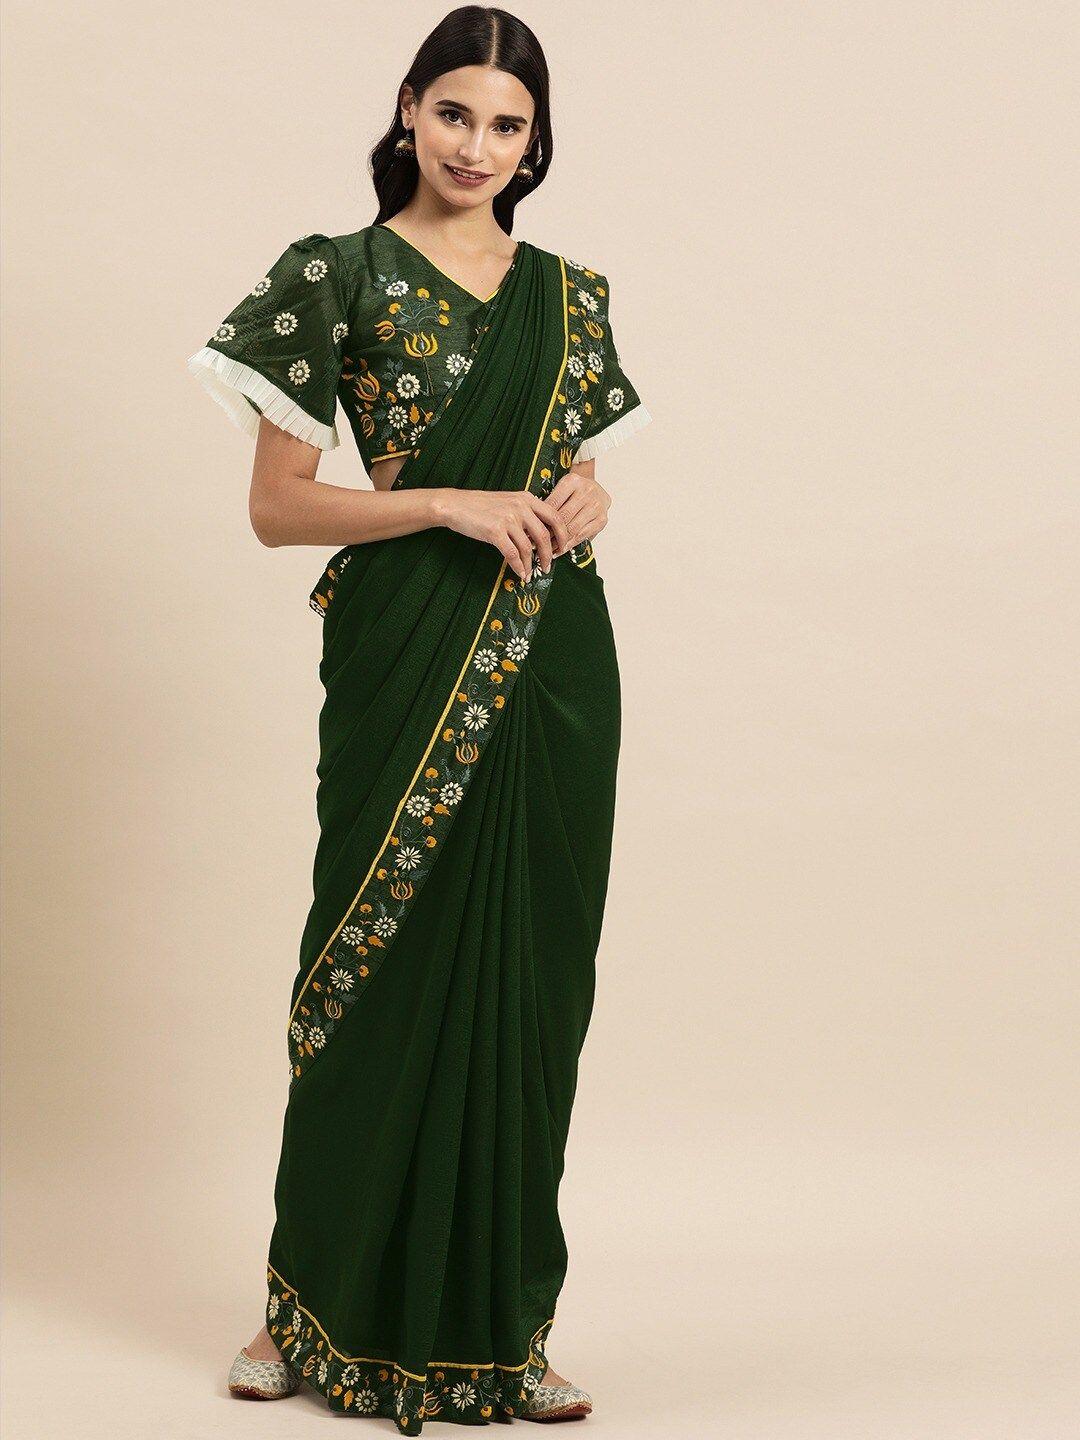 sangria olive green & yellow embroidered silk blend saree